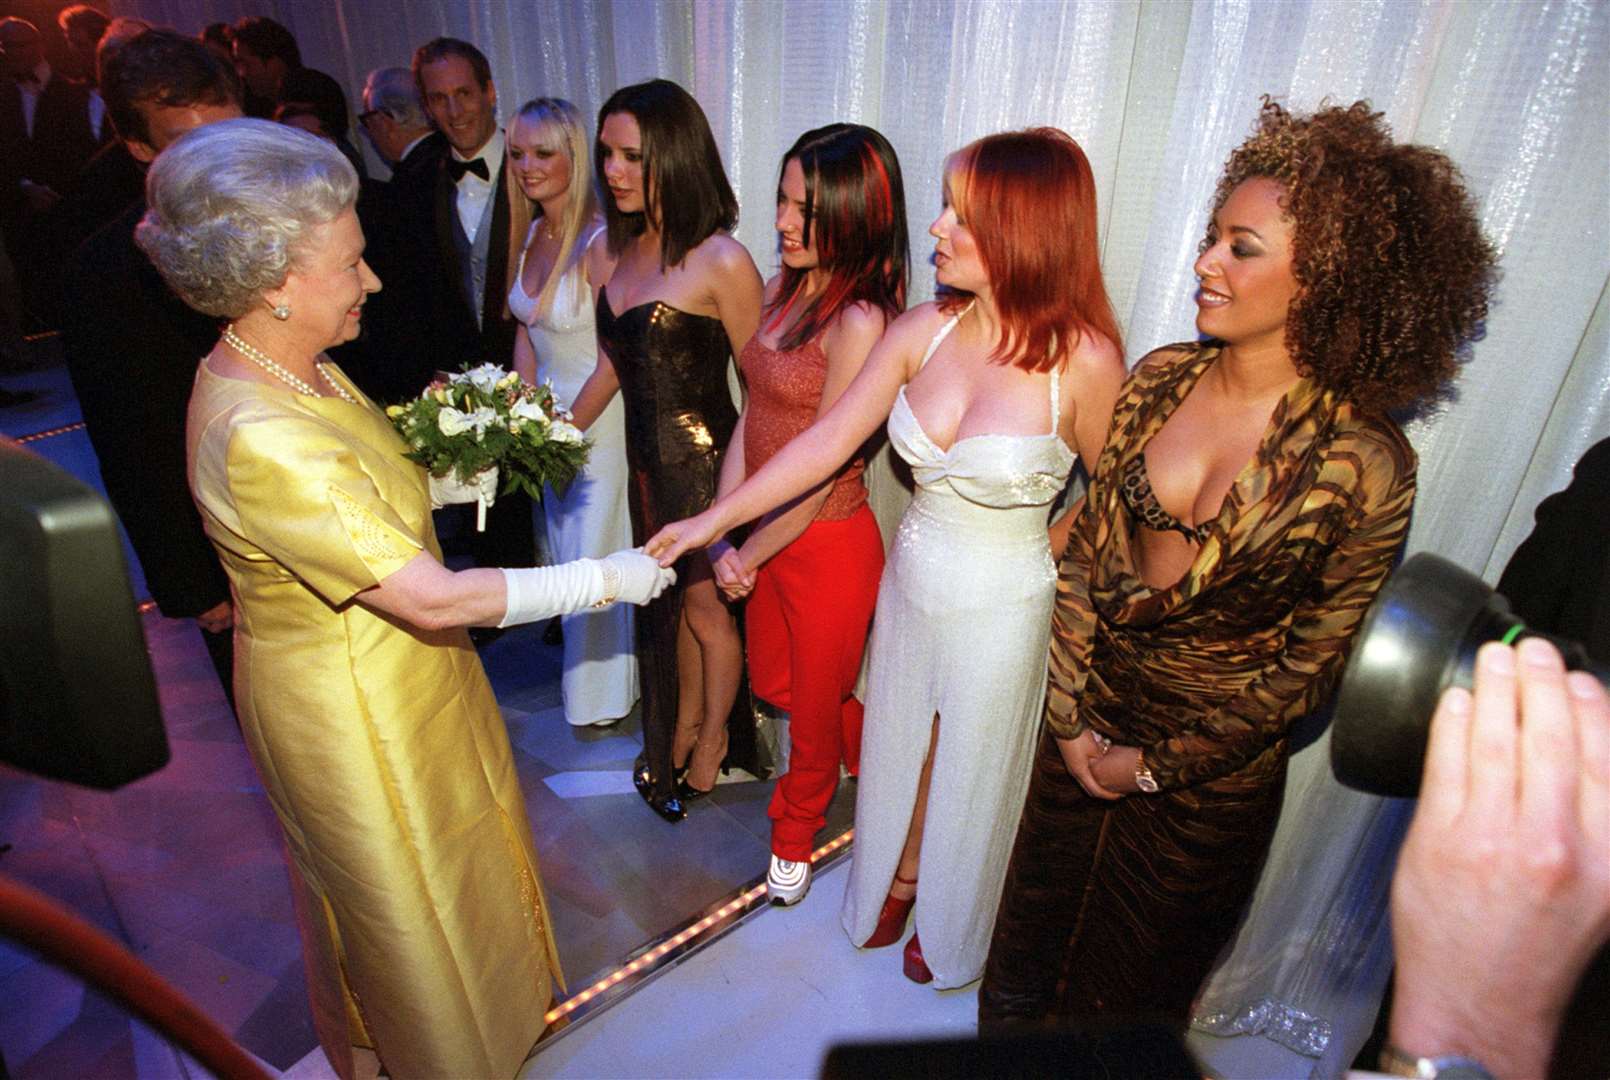 The Queen shakes hands with Geri Halliwell as she met the Spice Girls in 1998 (PA)